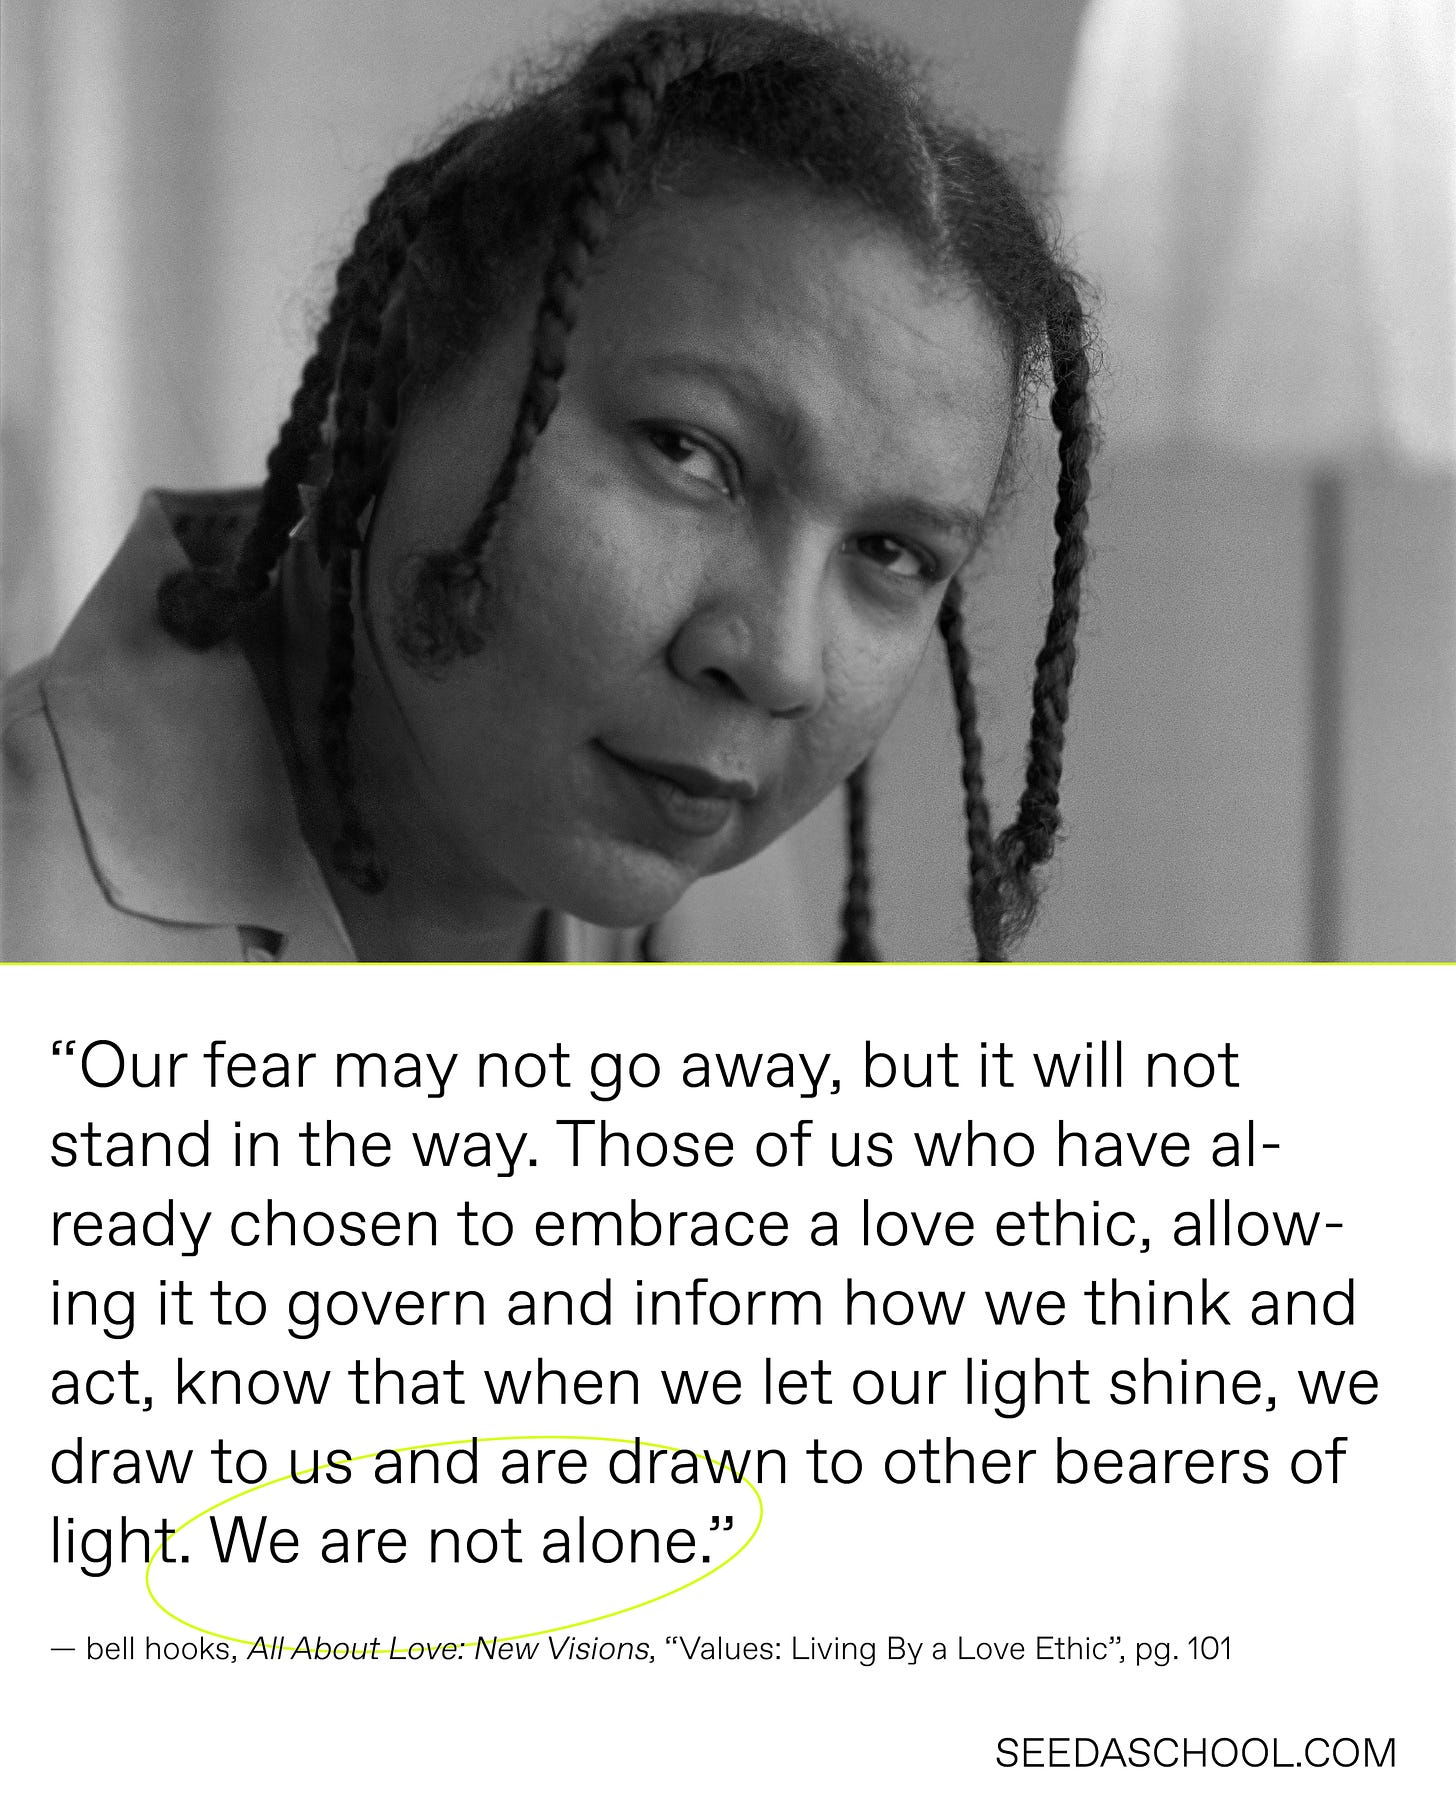 bell hooks photo above following quote, “Our fear may not go away, but it will not stand in the way. Those of us who have already chosen to embrace a love ethic, allowing it to govern and inform how we think and act, know that when we let our light shine, we draw to us and are drawn to other bearers of light. We are not alone.”